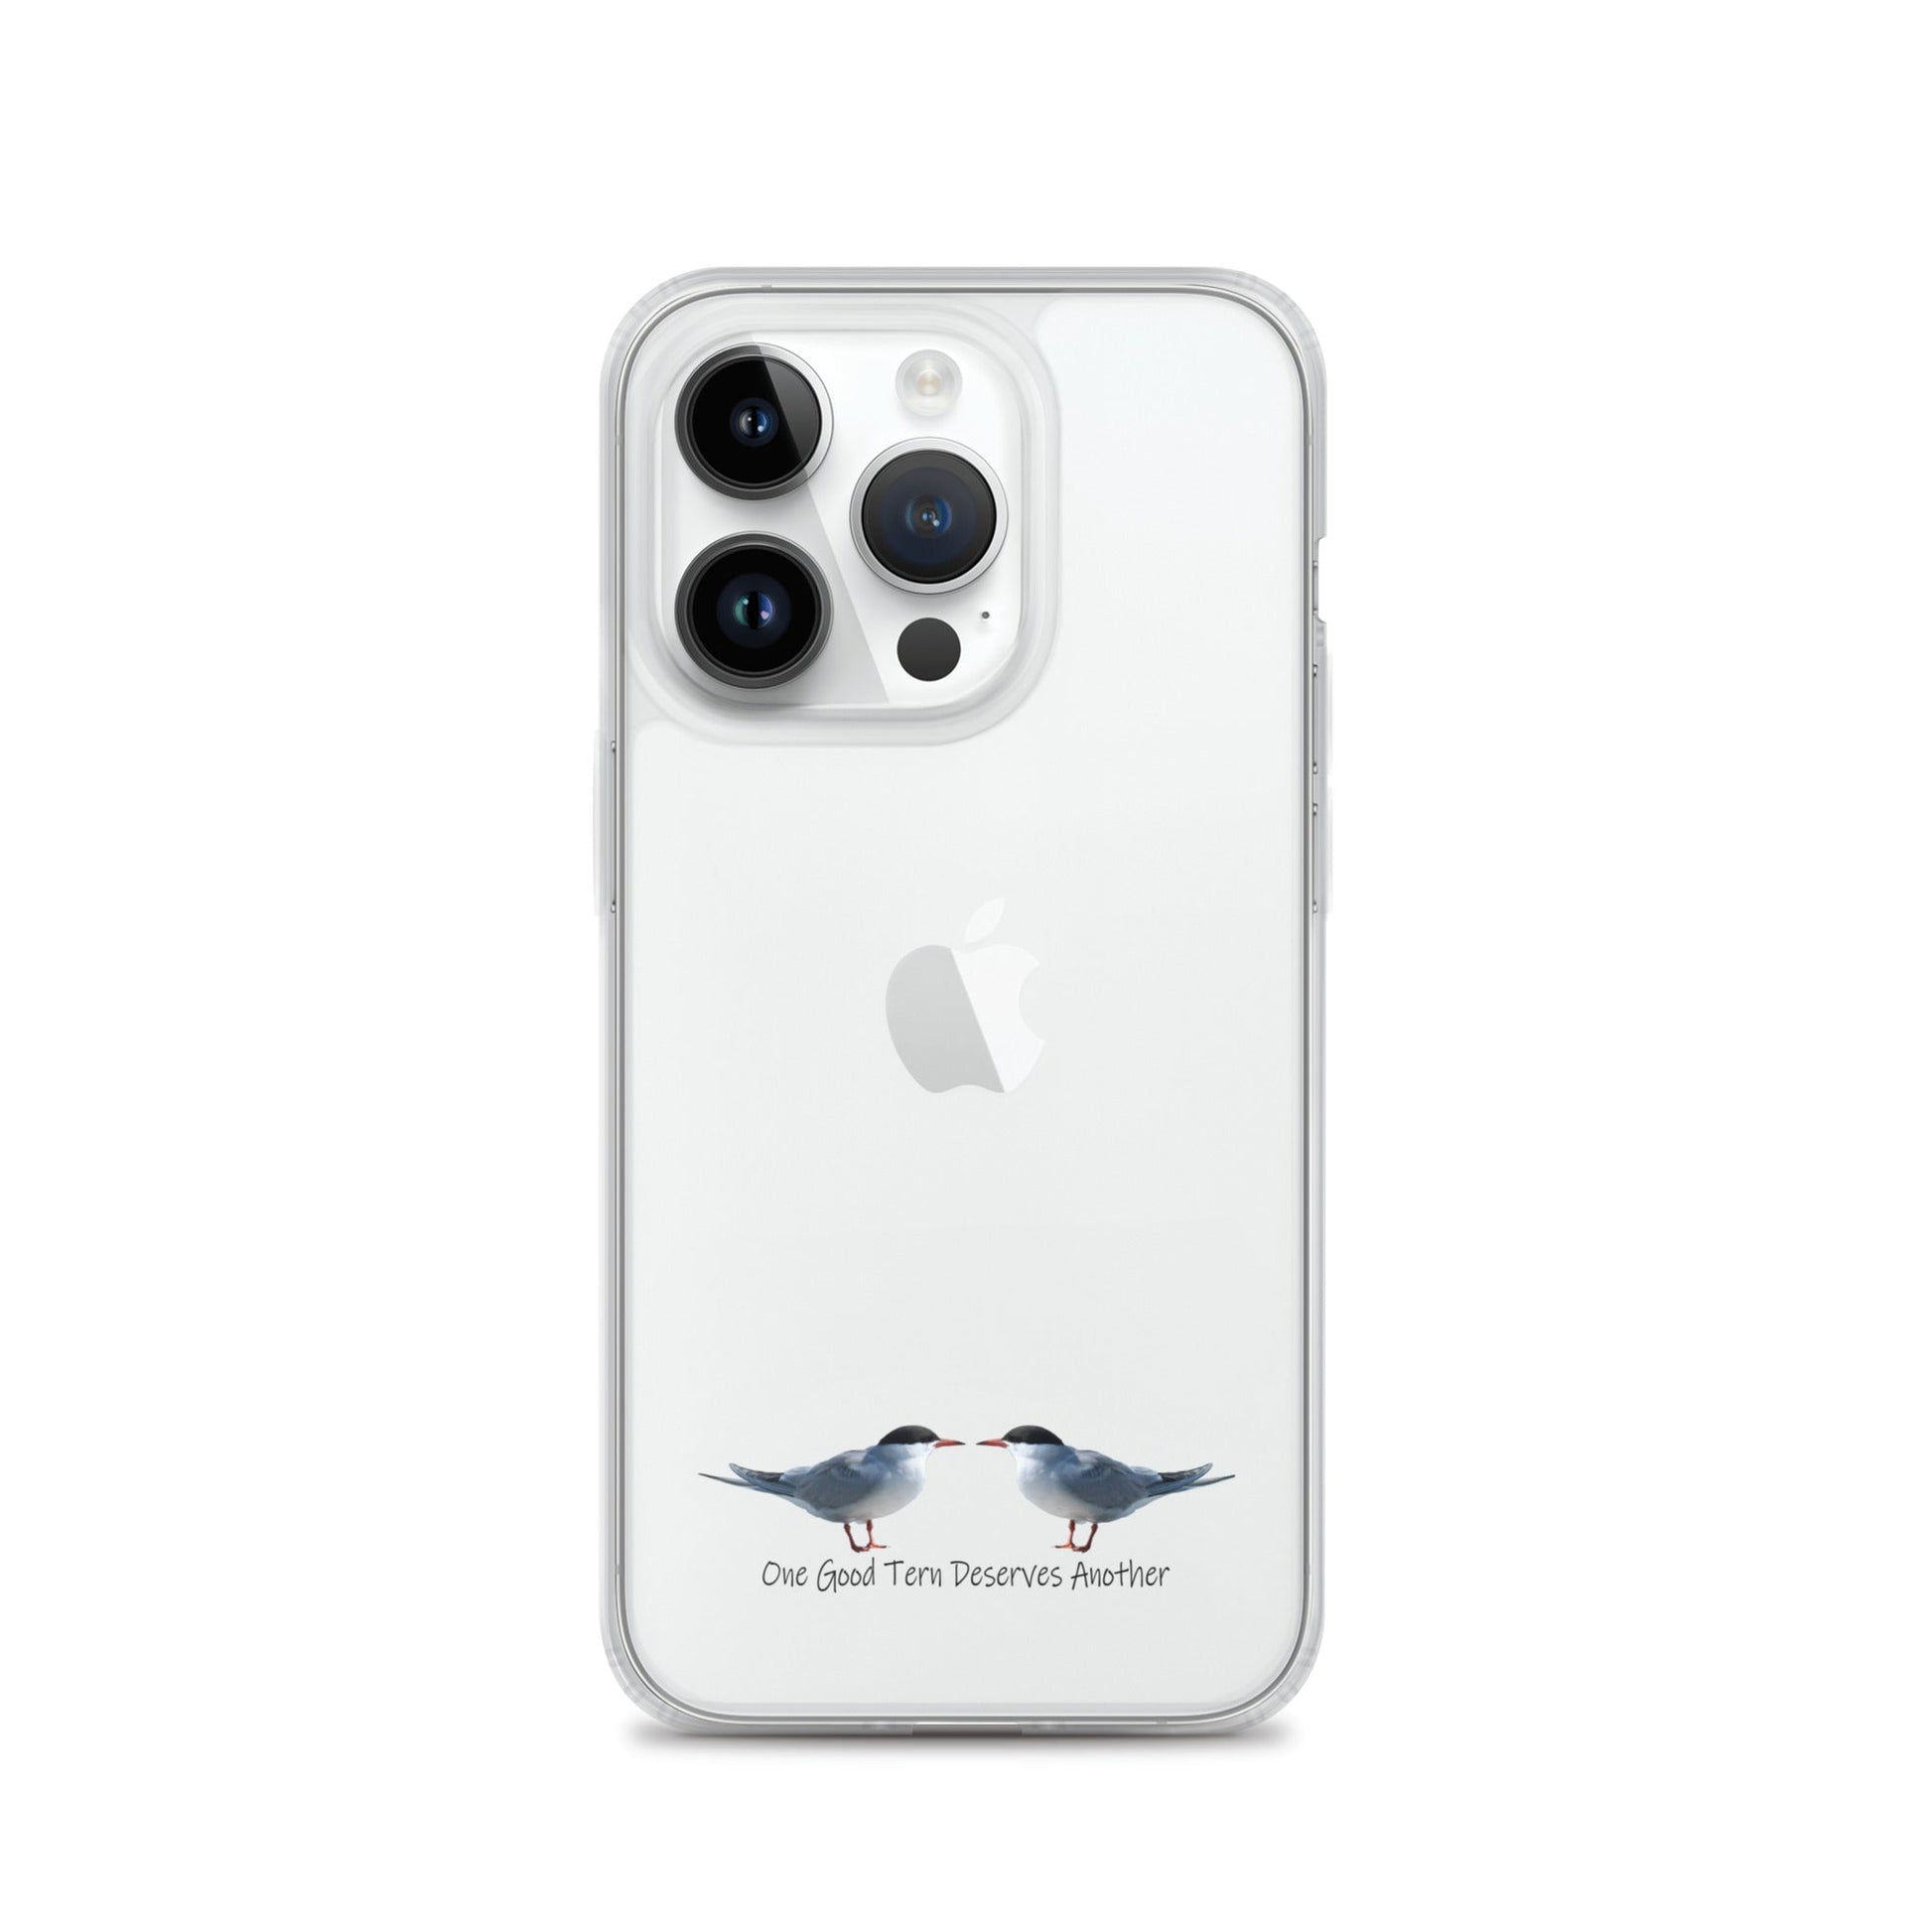 One Good Tern Deserves Another iPhone Case